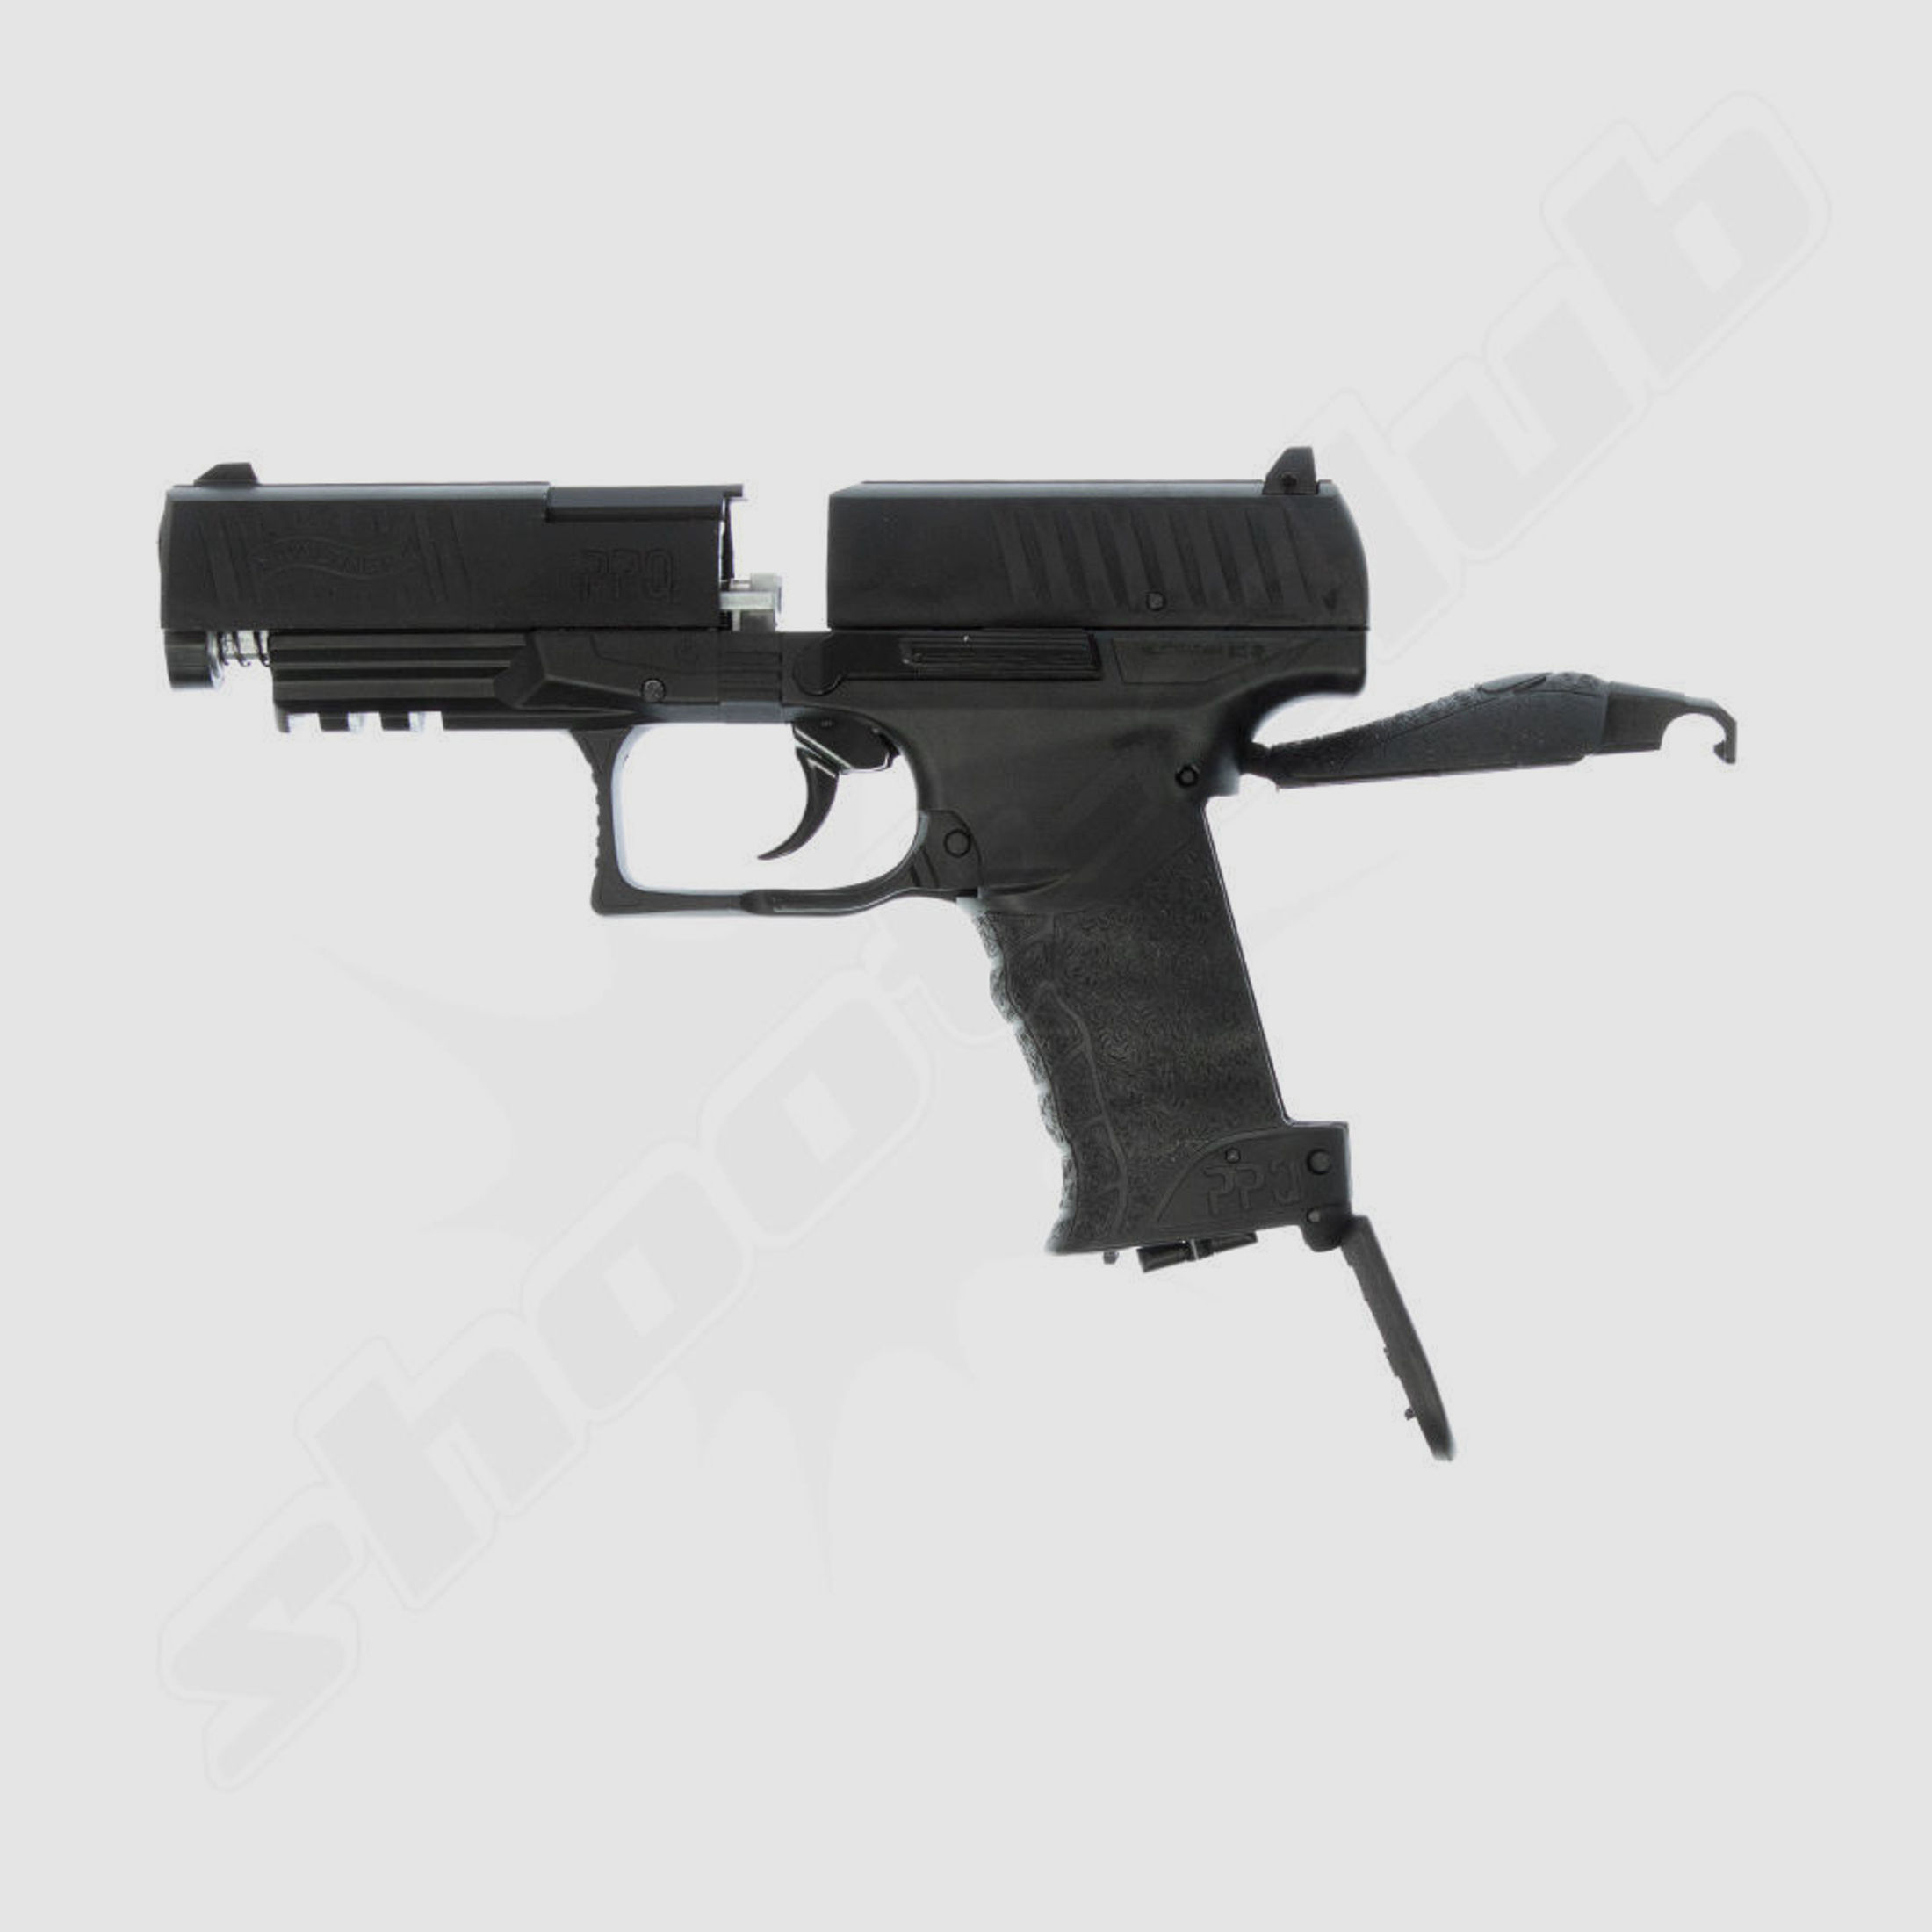 Walther PPQ CO2 Pistole NBB 4,5 mm Diabolos - Koffer-Set